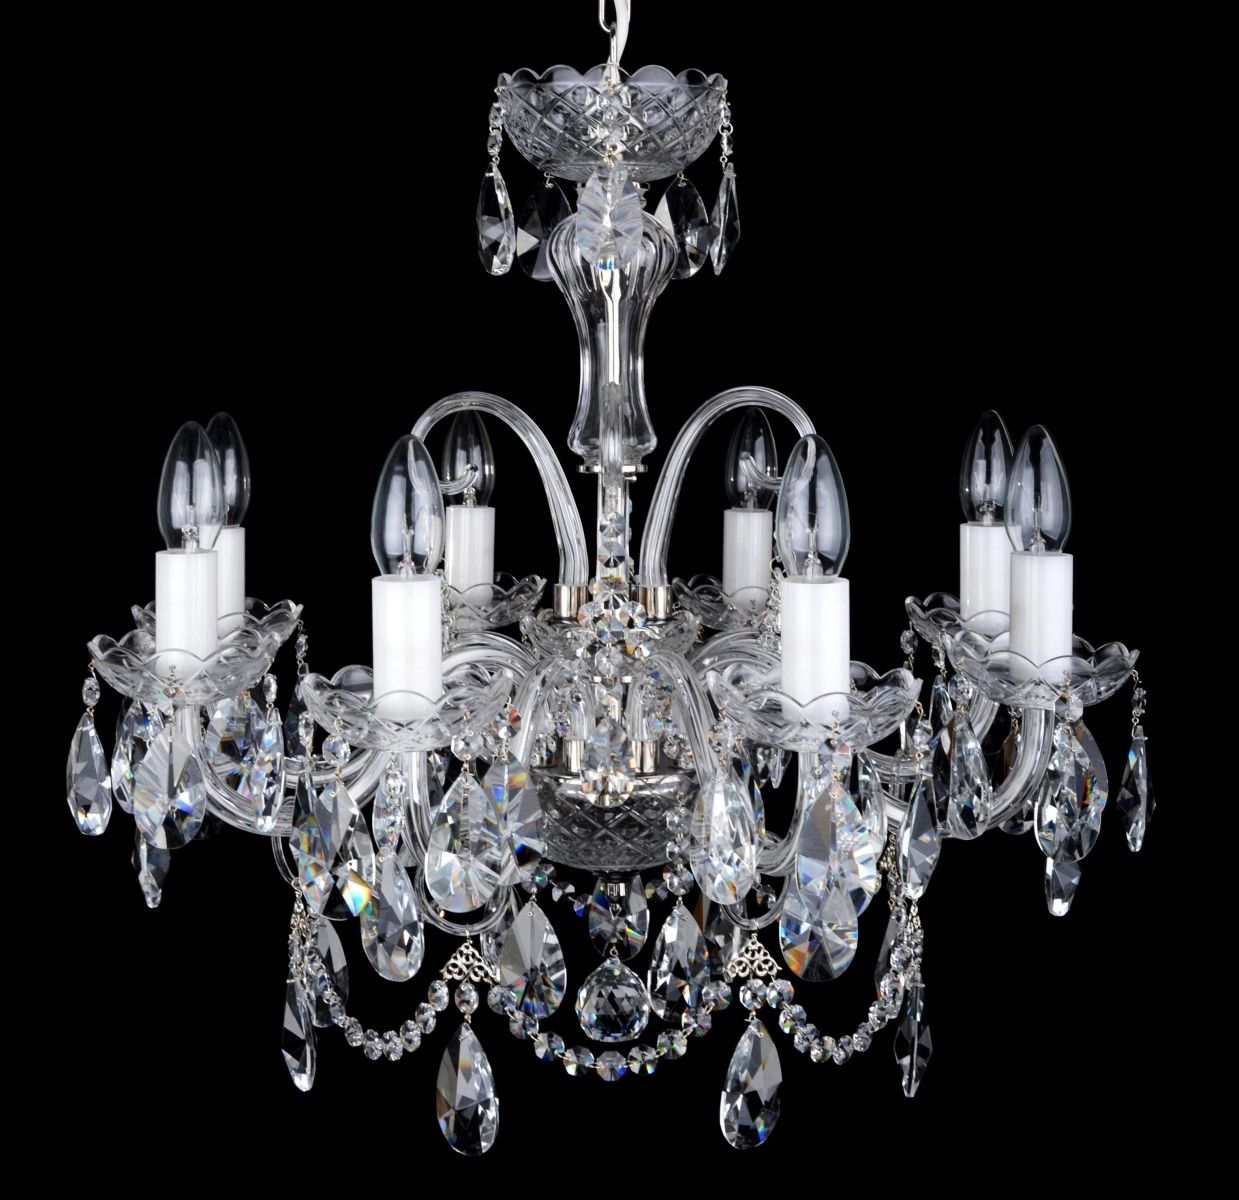 Trendy Soft Silver Crystal Chandeliers Throughout 8 Arms Silver Crystal Chandelier With Cut Crystal Almonds (View 19 of 20)